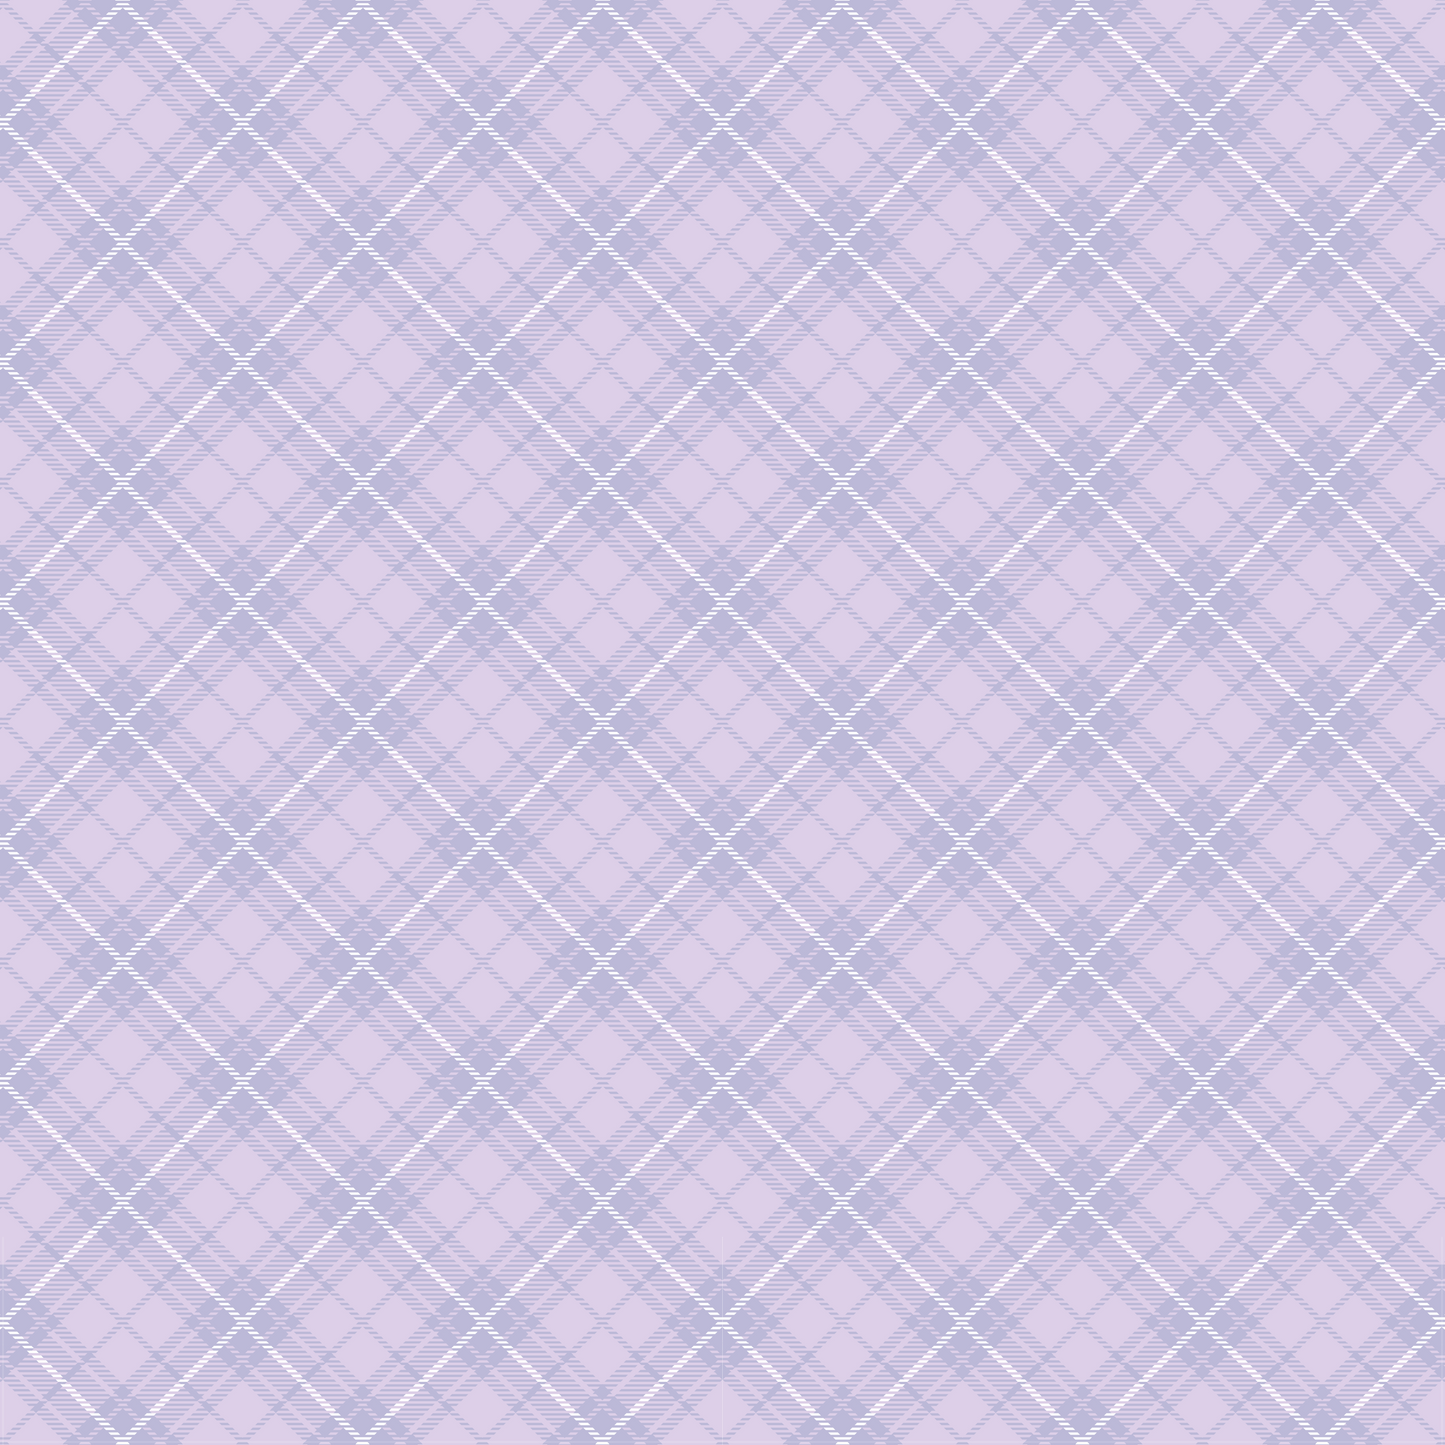 Easter Plaid - Purple and Lavender 003